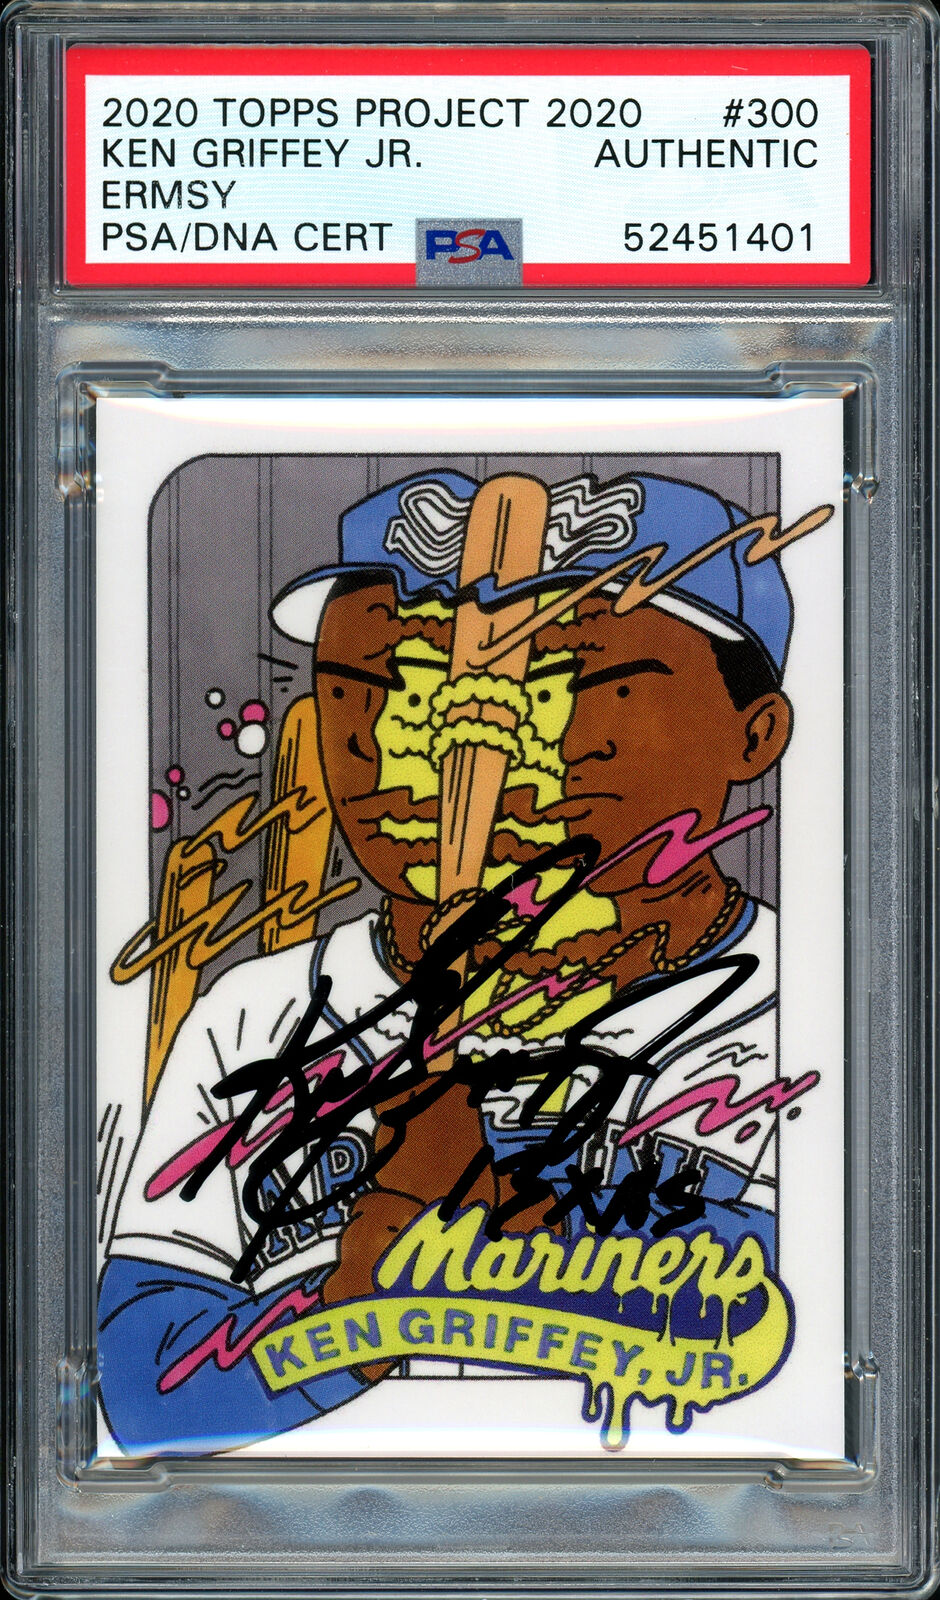 Ken Griffey Jr. Auto Topps Project 2020 Ermsy Card "13x AS" #1/1 PSA 52451401 Image 4